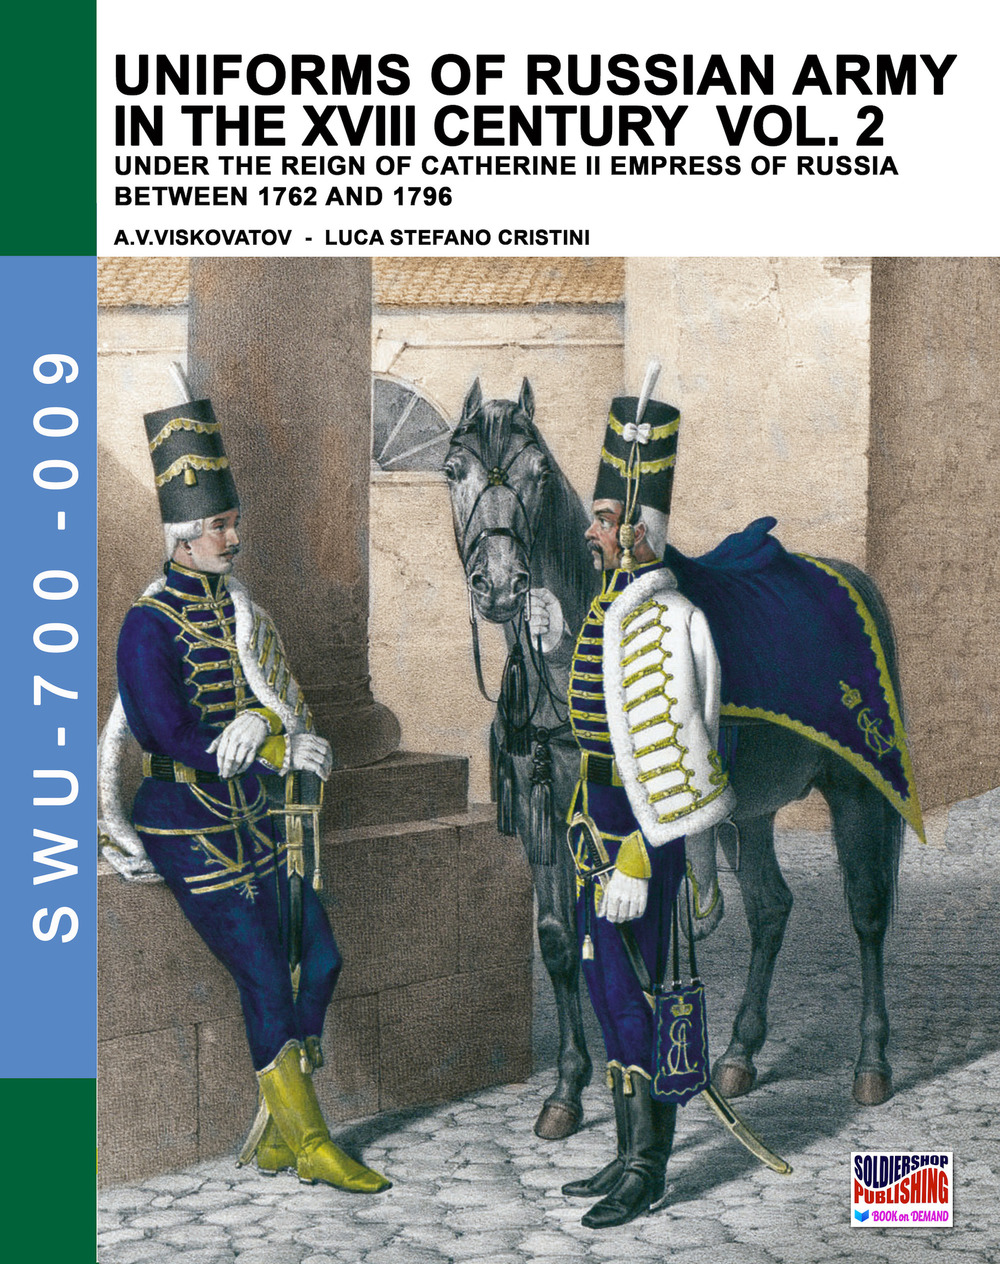 Uniforms of russian army in the XVIII century. Under the reign of Catherine II Empress of Russia between 1762 and 1796. Vol. 2